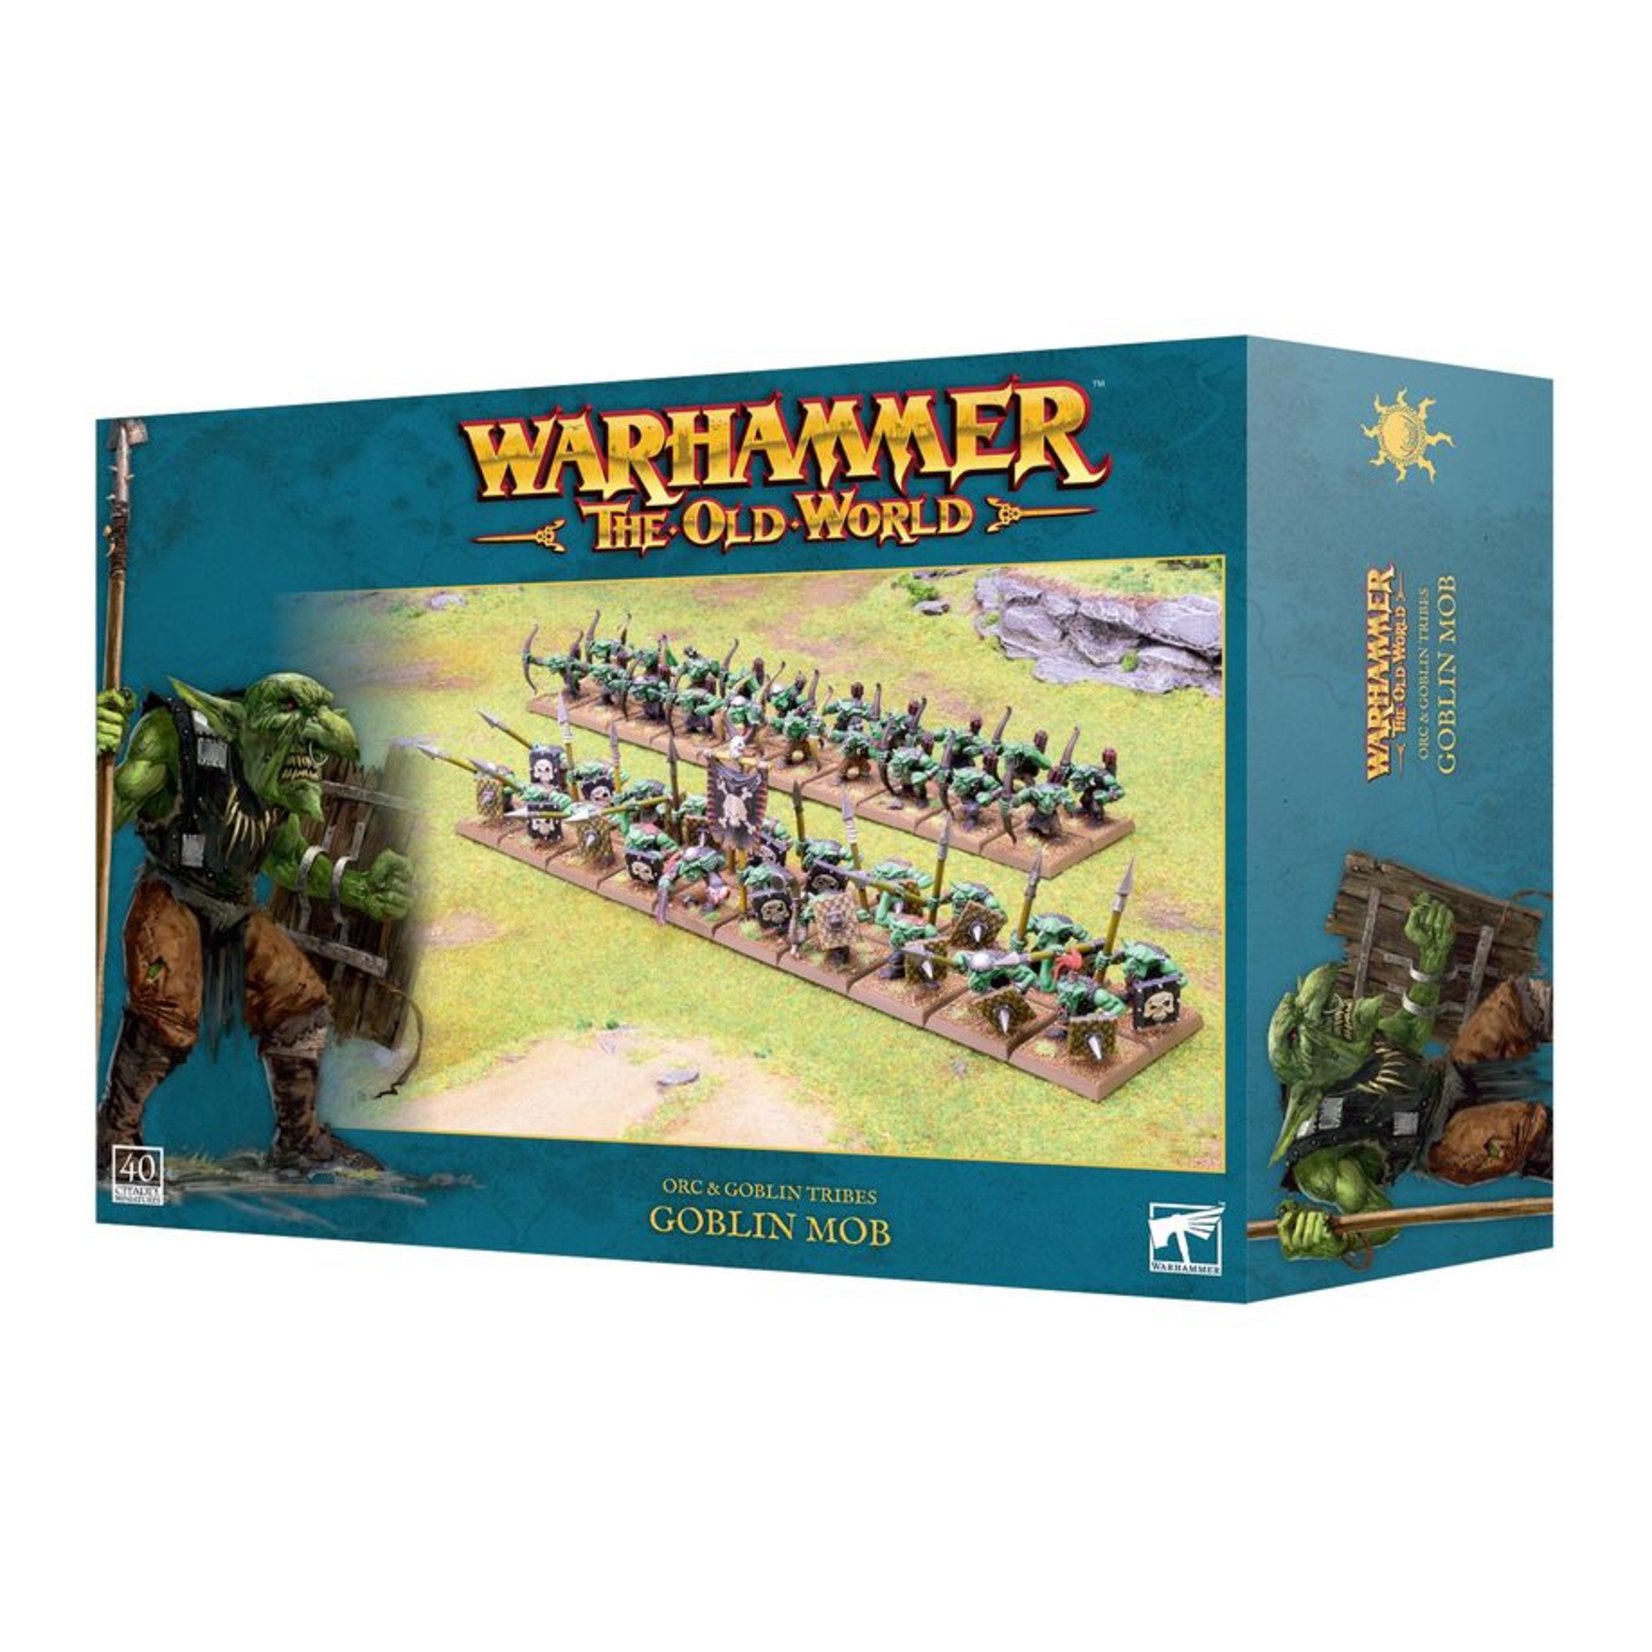 Games Workshop Warhammer The Old World Orc and Goblin Tribes Goblin Mob